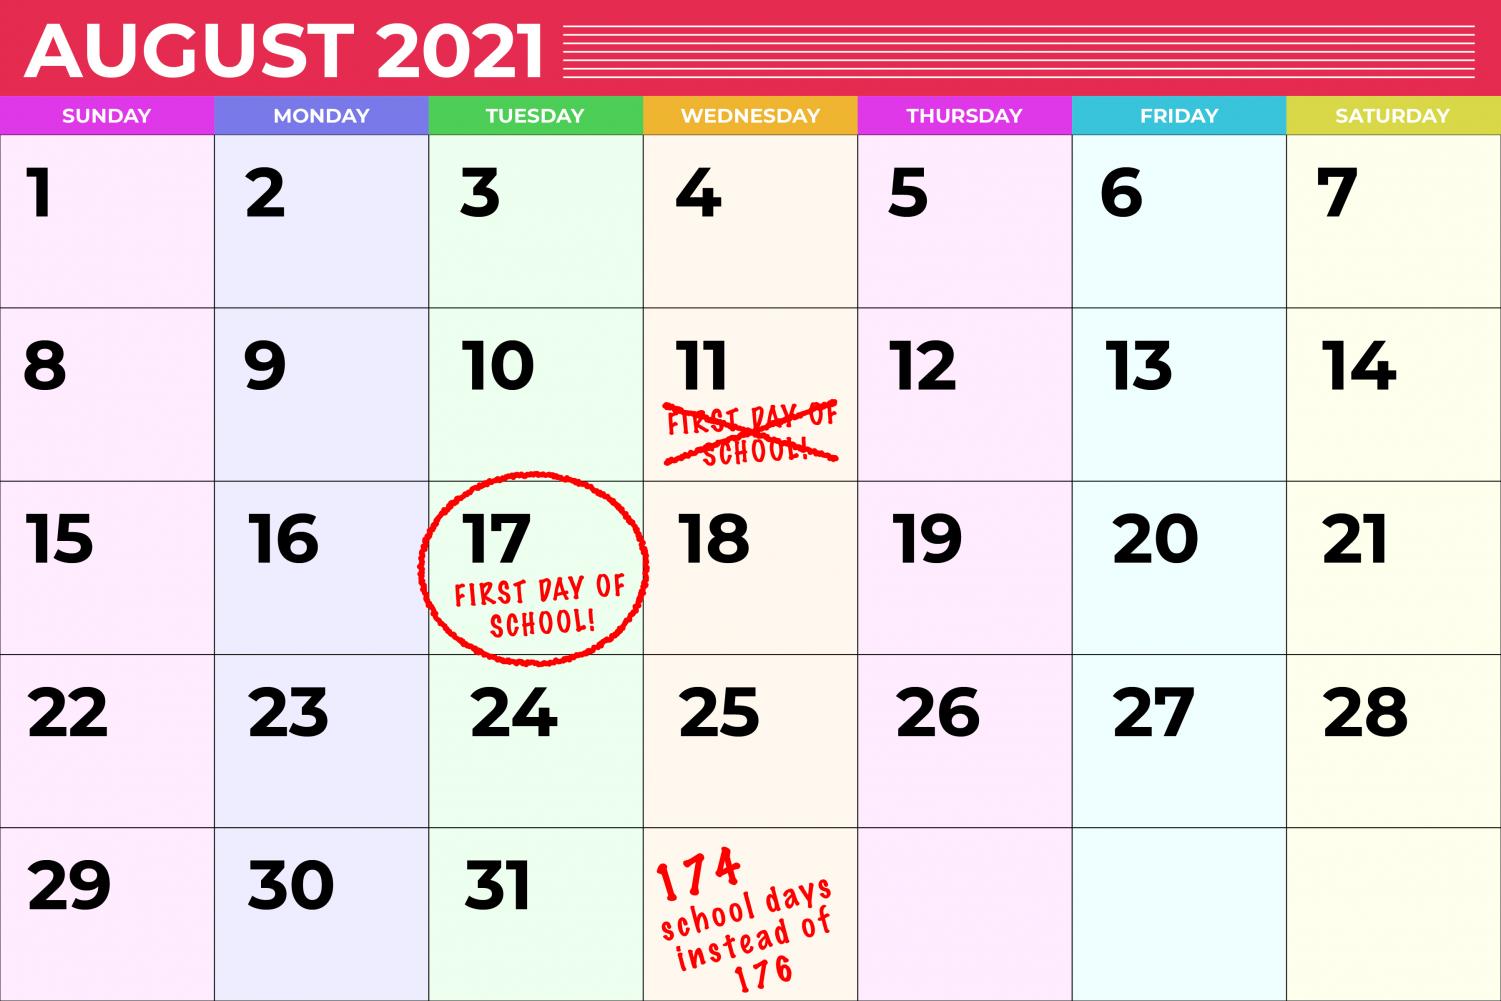 Coppell Isd Calendar 2022 23 District Approves Changes To 2021-22 Calendar – Coppell Student Media